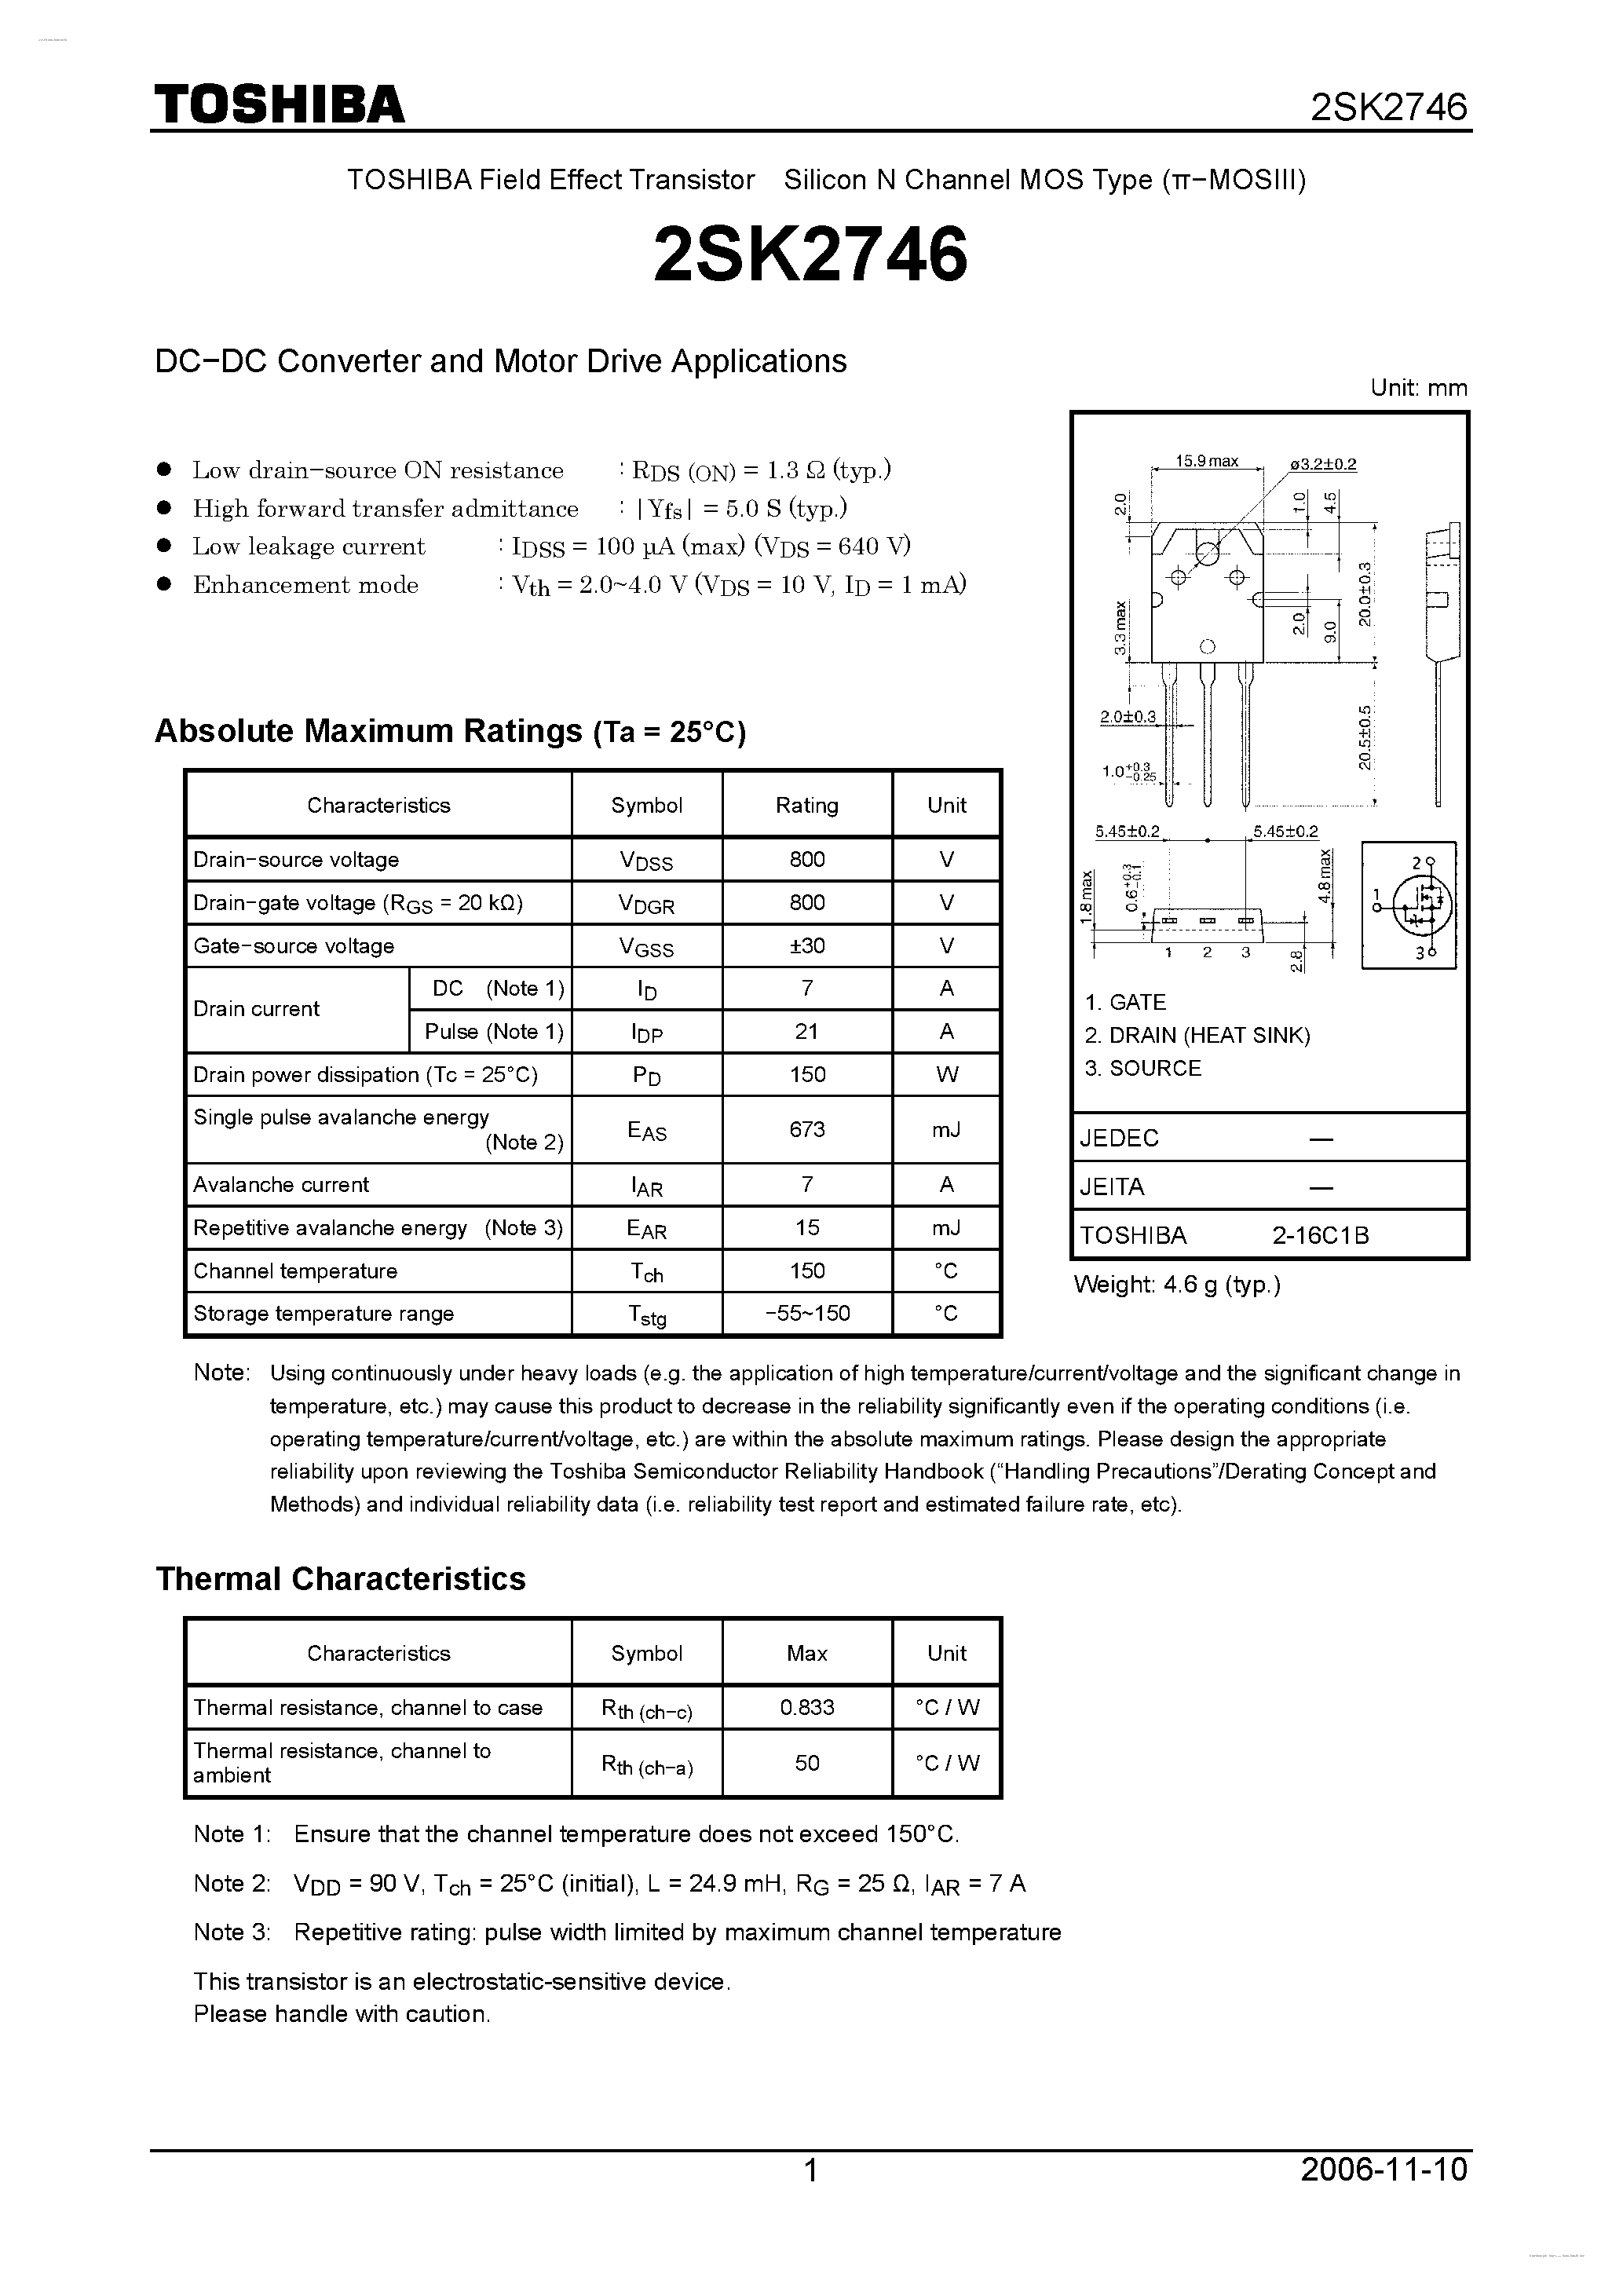 Datasheet K2746 - Search -----> 2SK2746 page 1